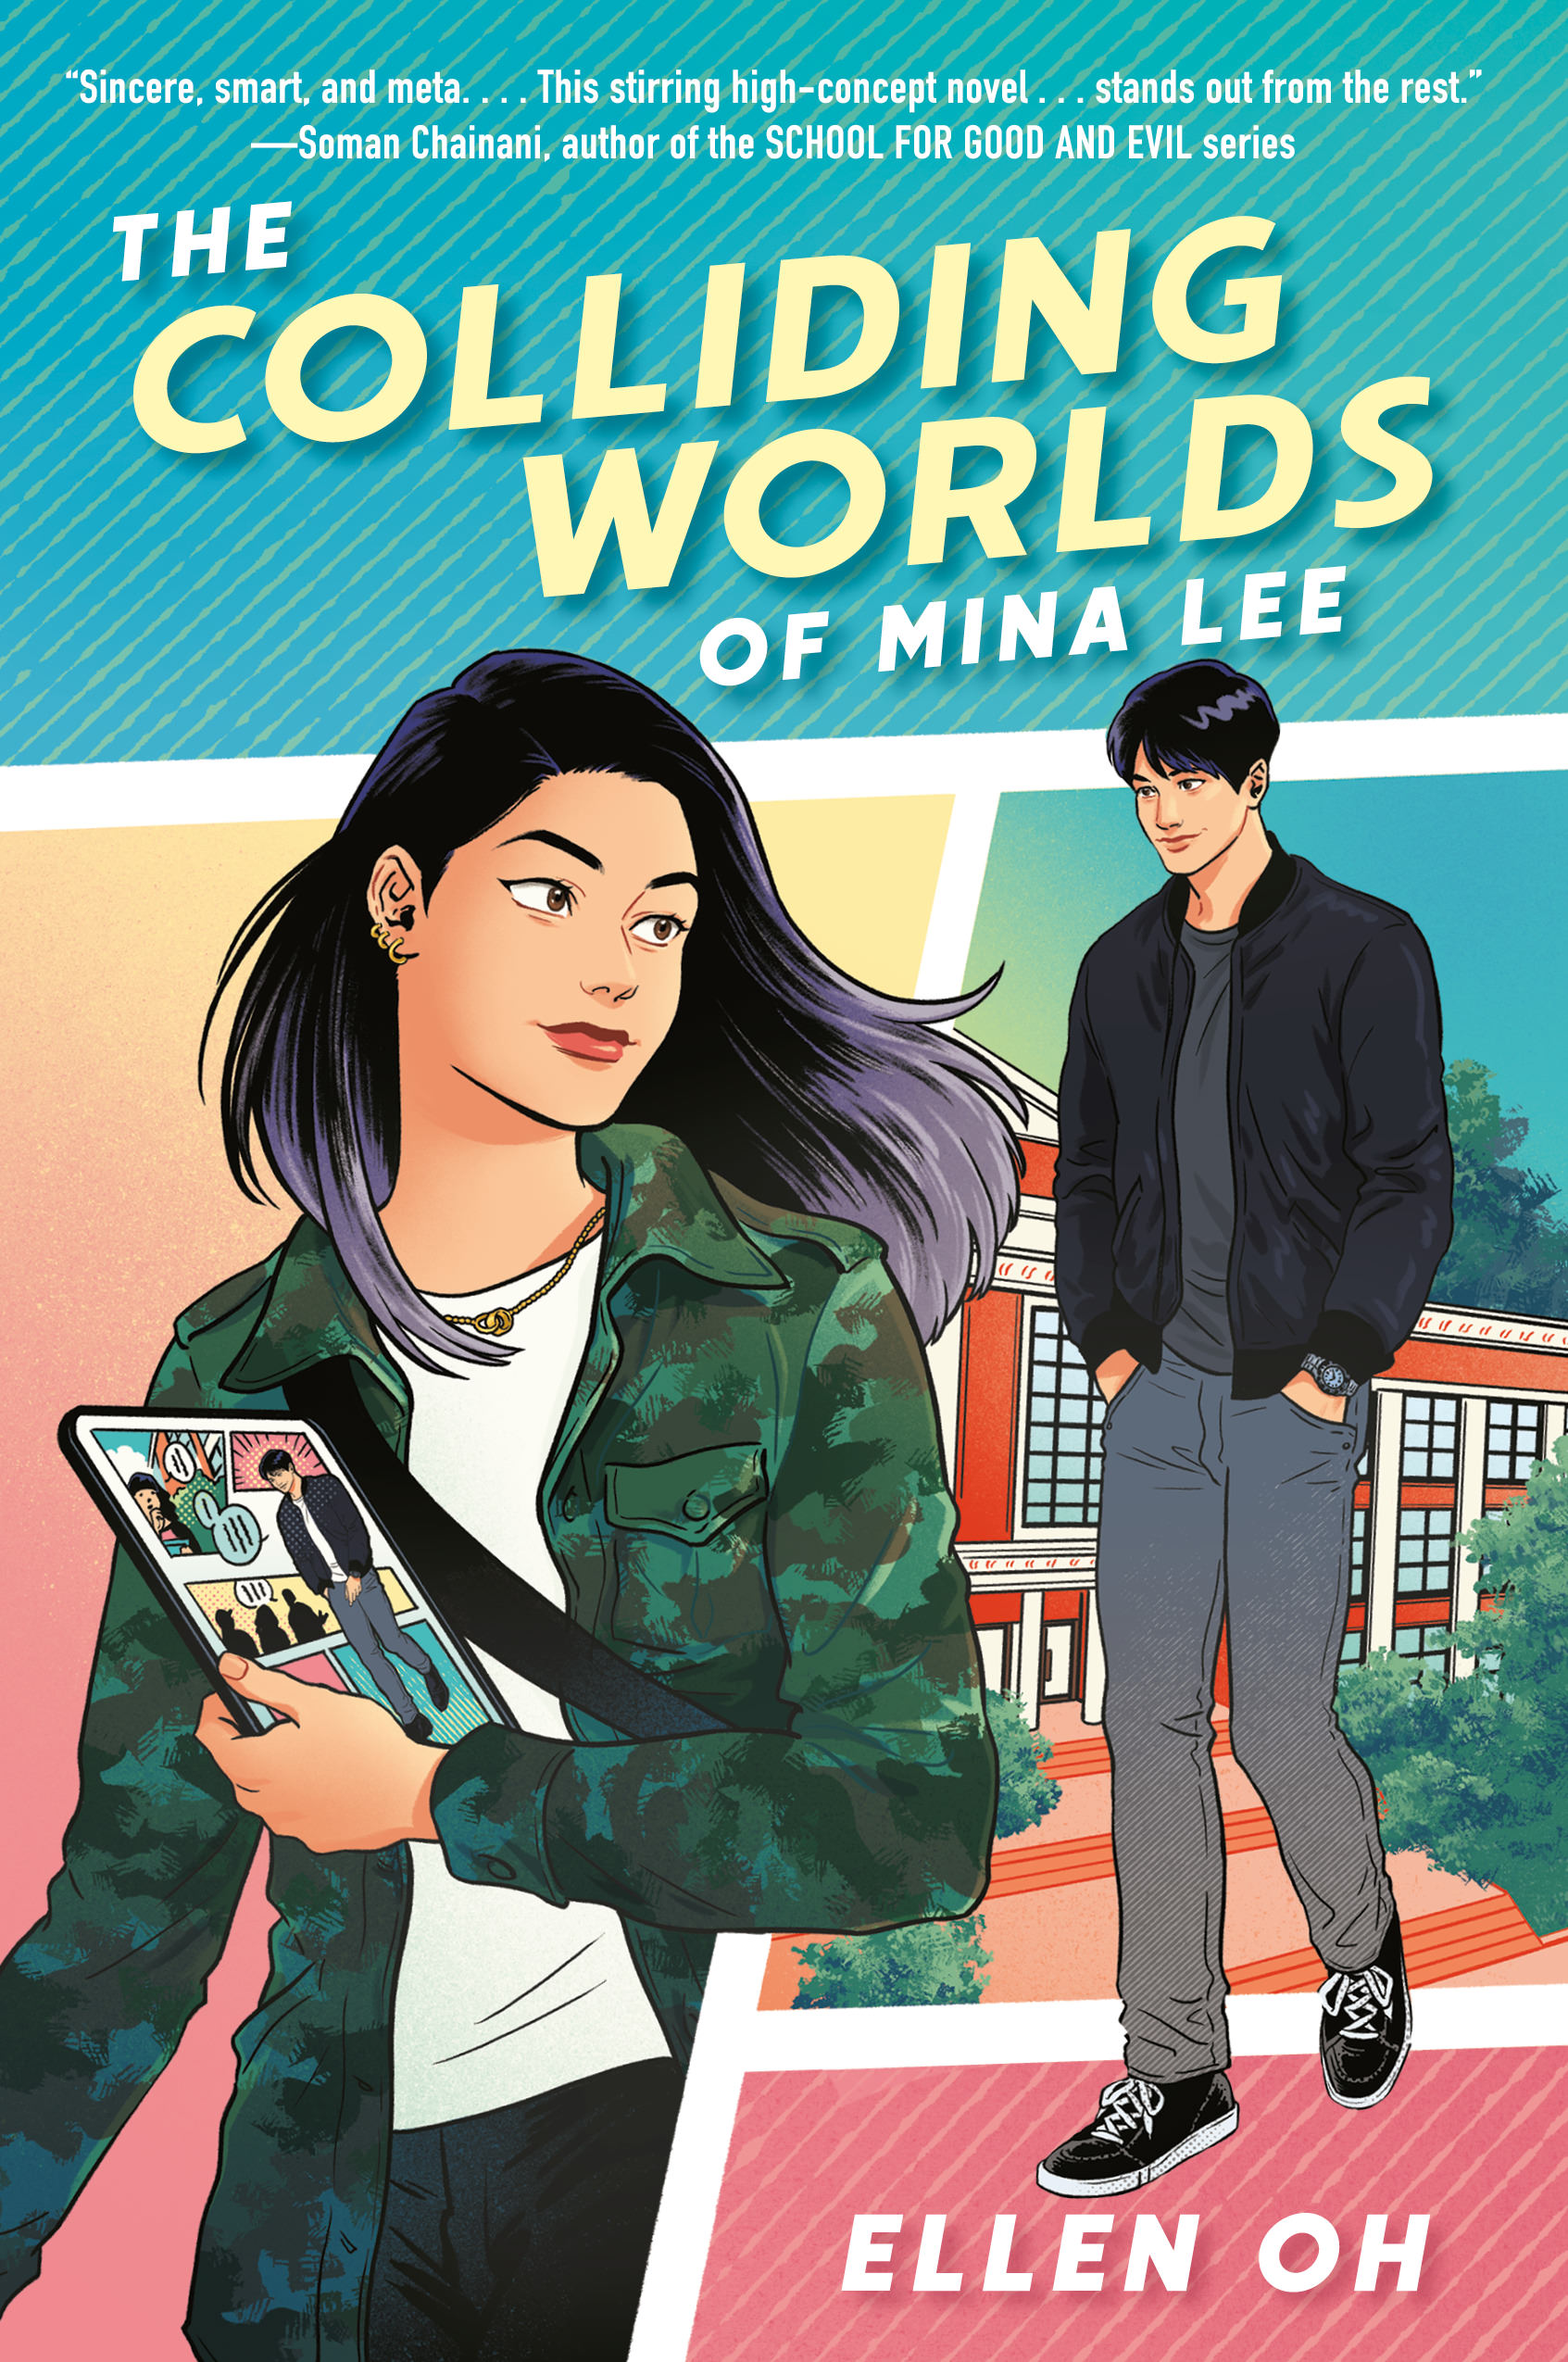 The Colliding Worlds of Mina Lee by Ellen Oh